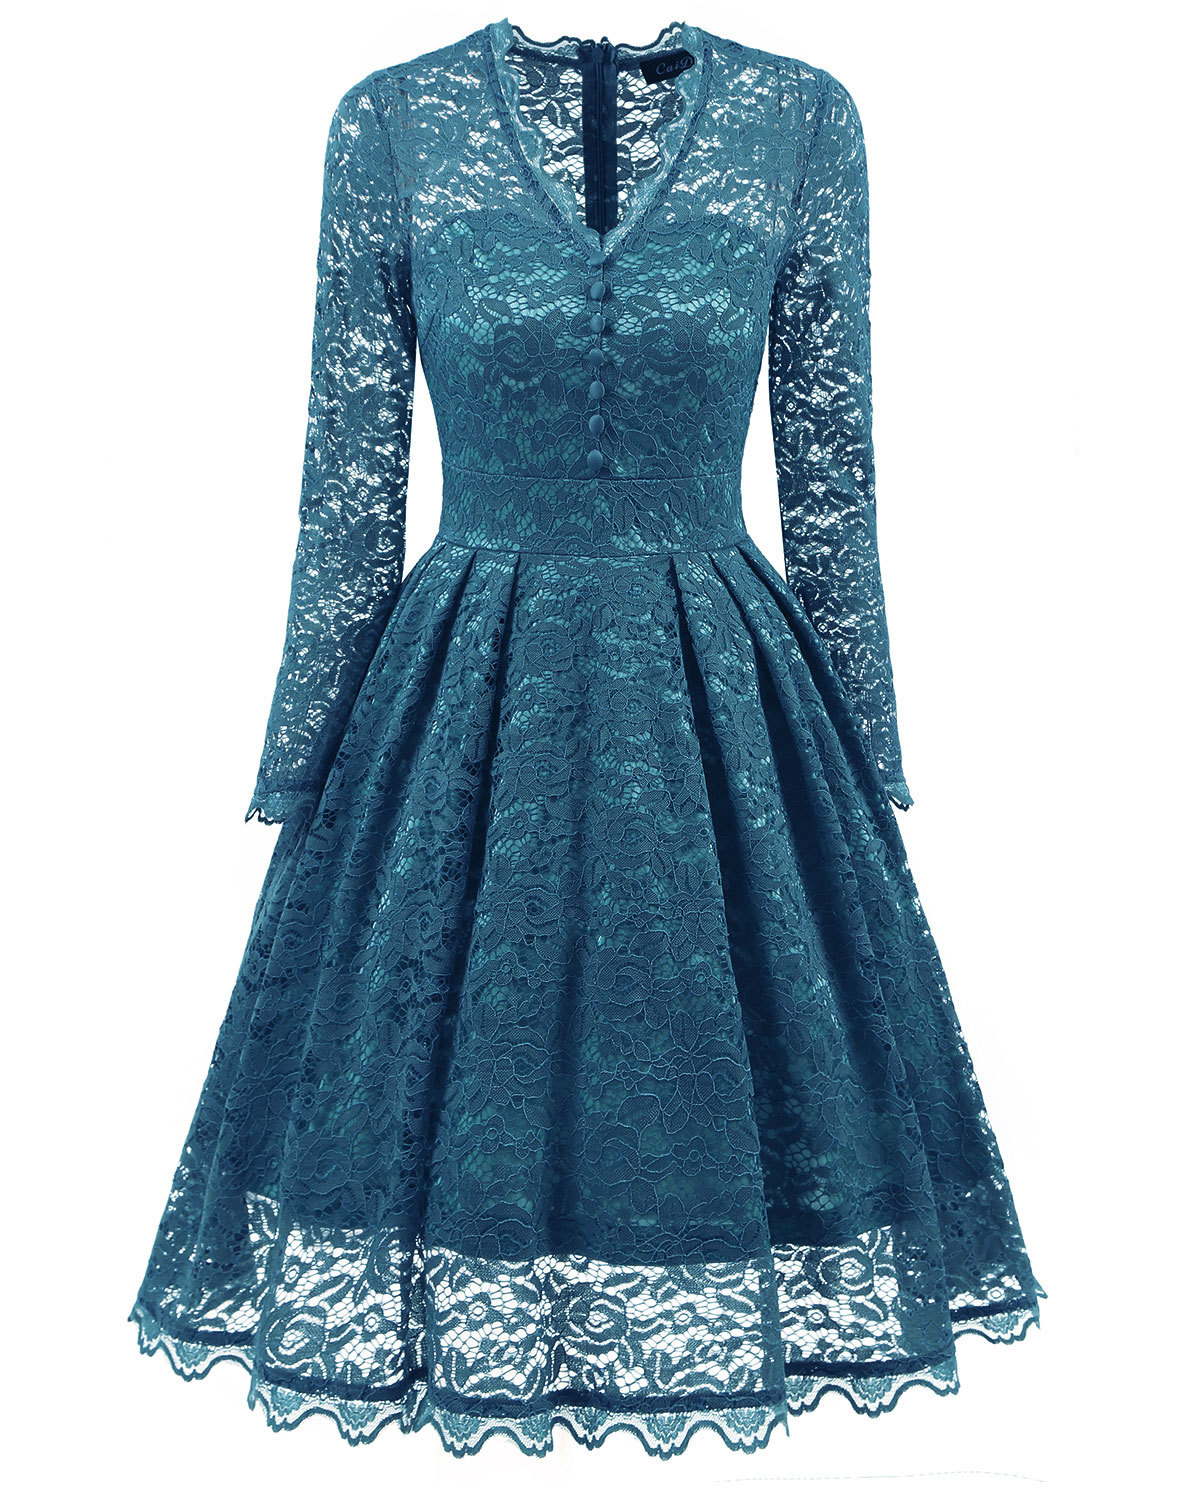 F2528-5 Retro Floral Lace Long Sleeve Vintage Swing Cocktail Bridesmaid Dress